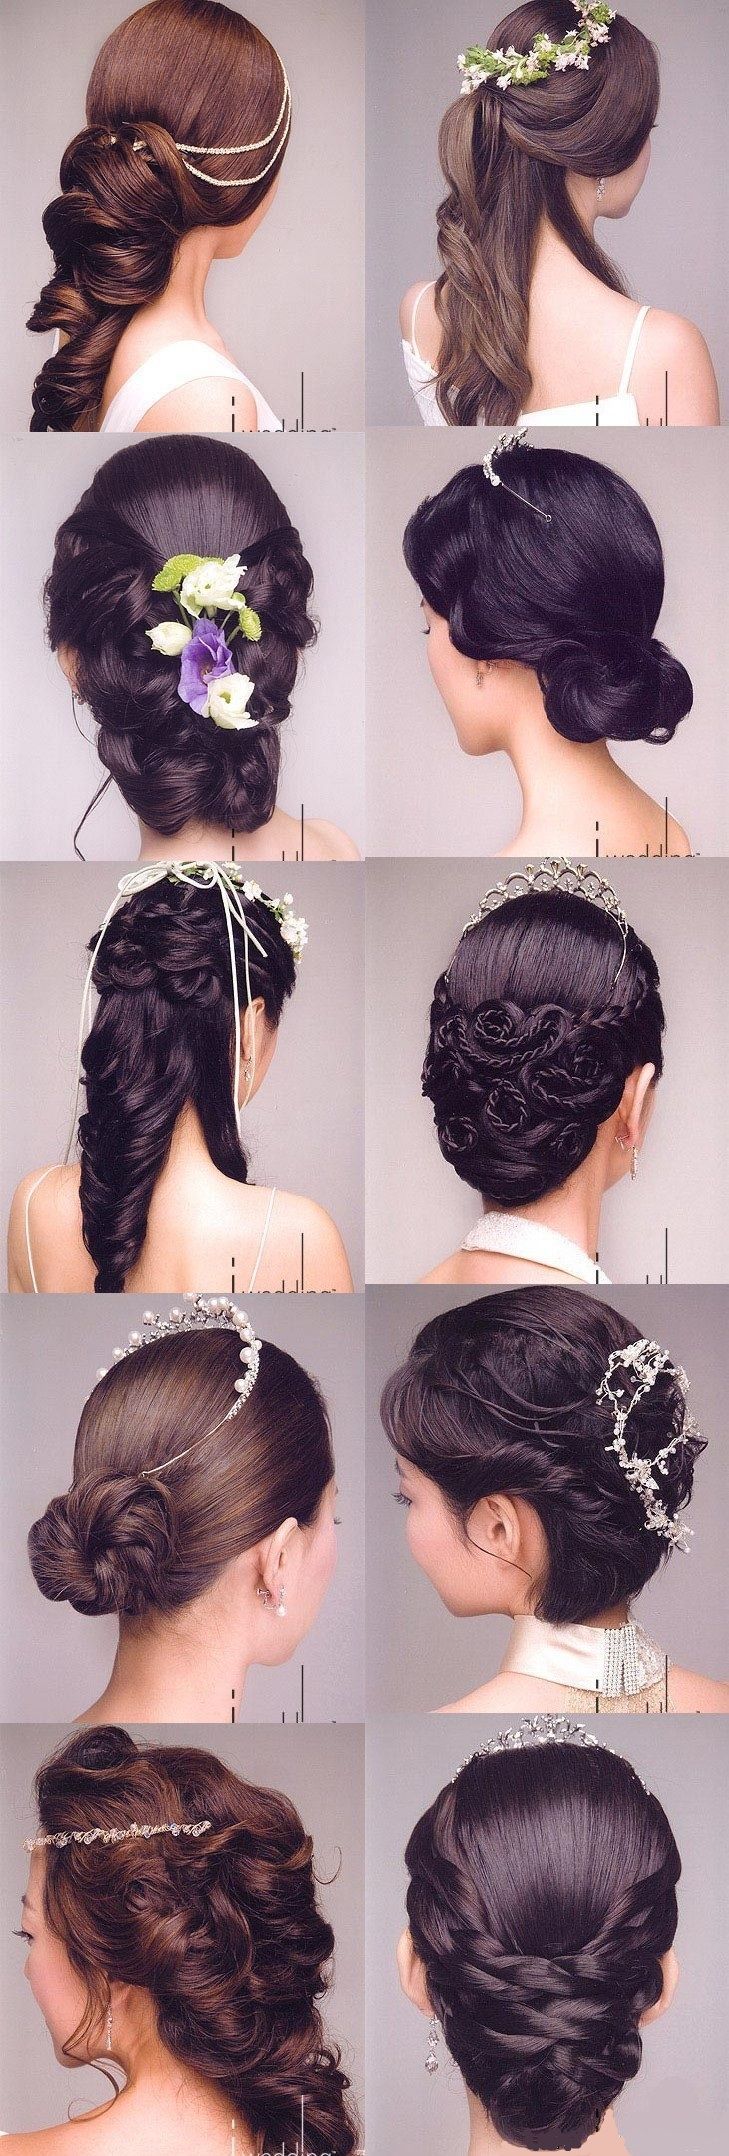 beautiful hair options for weddings and other special occasions